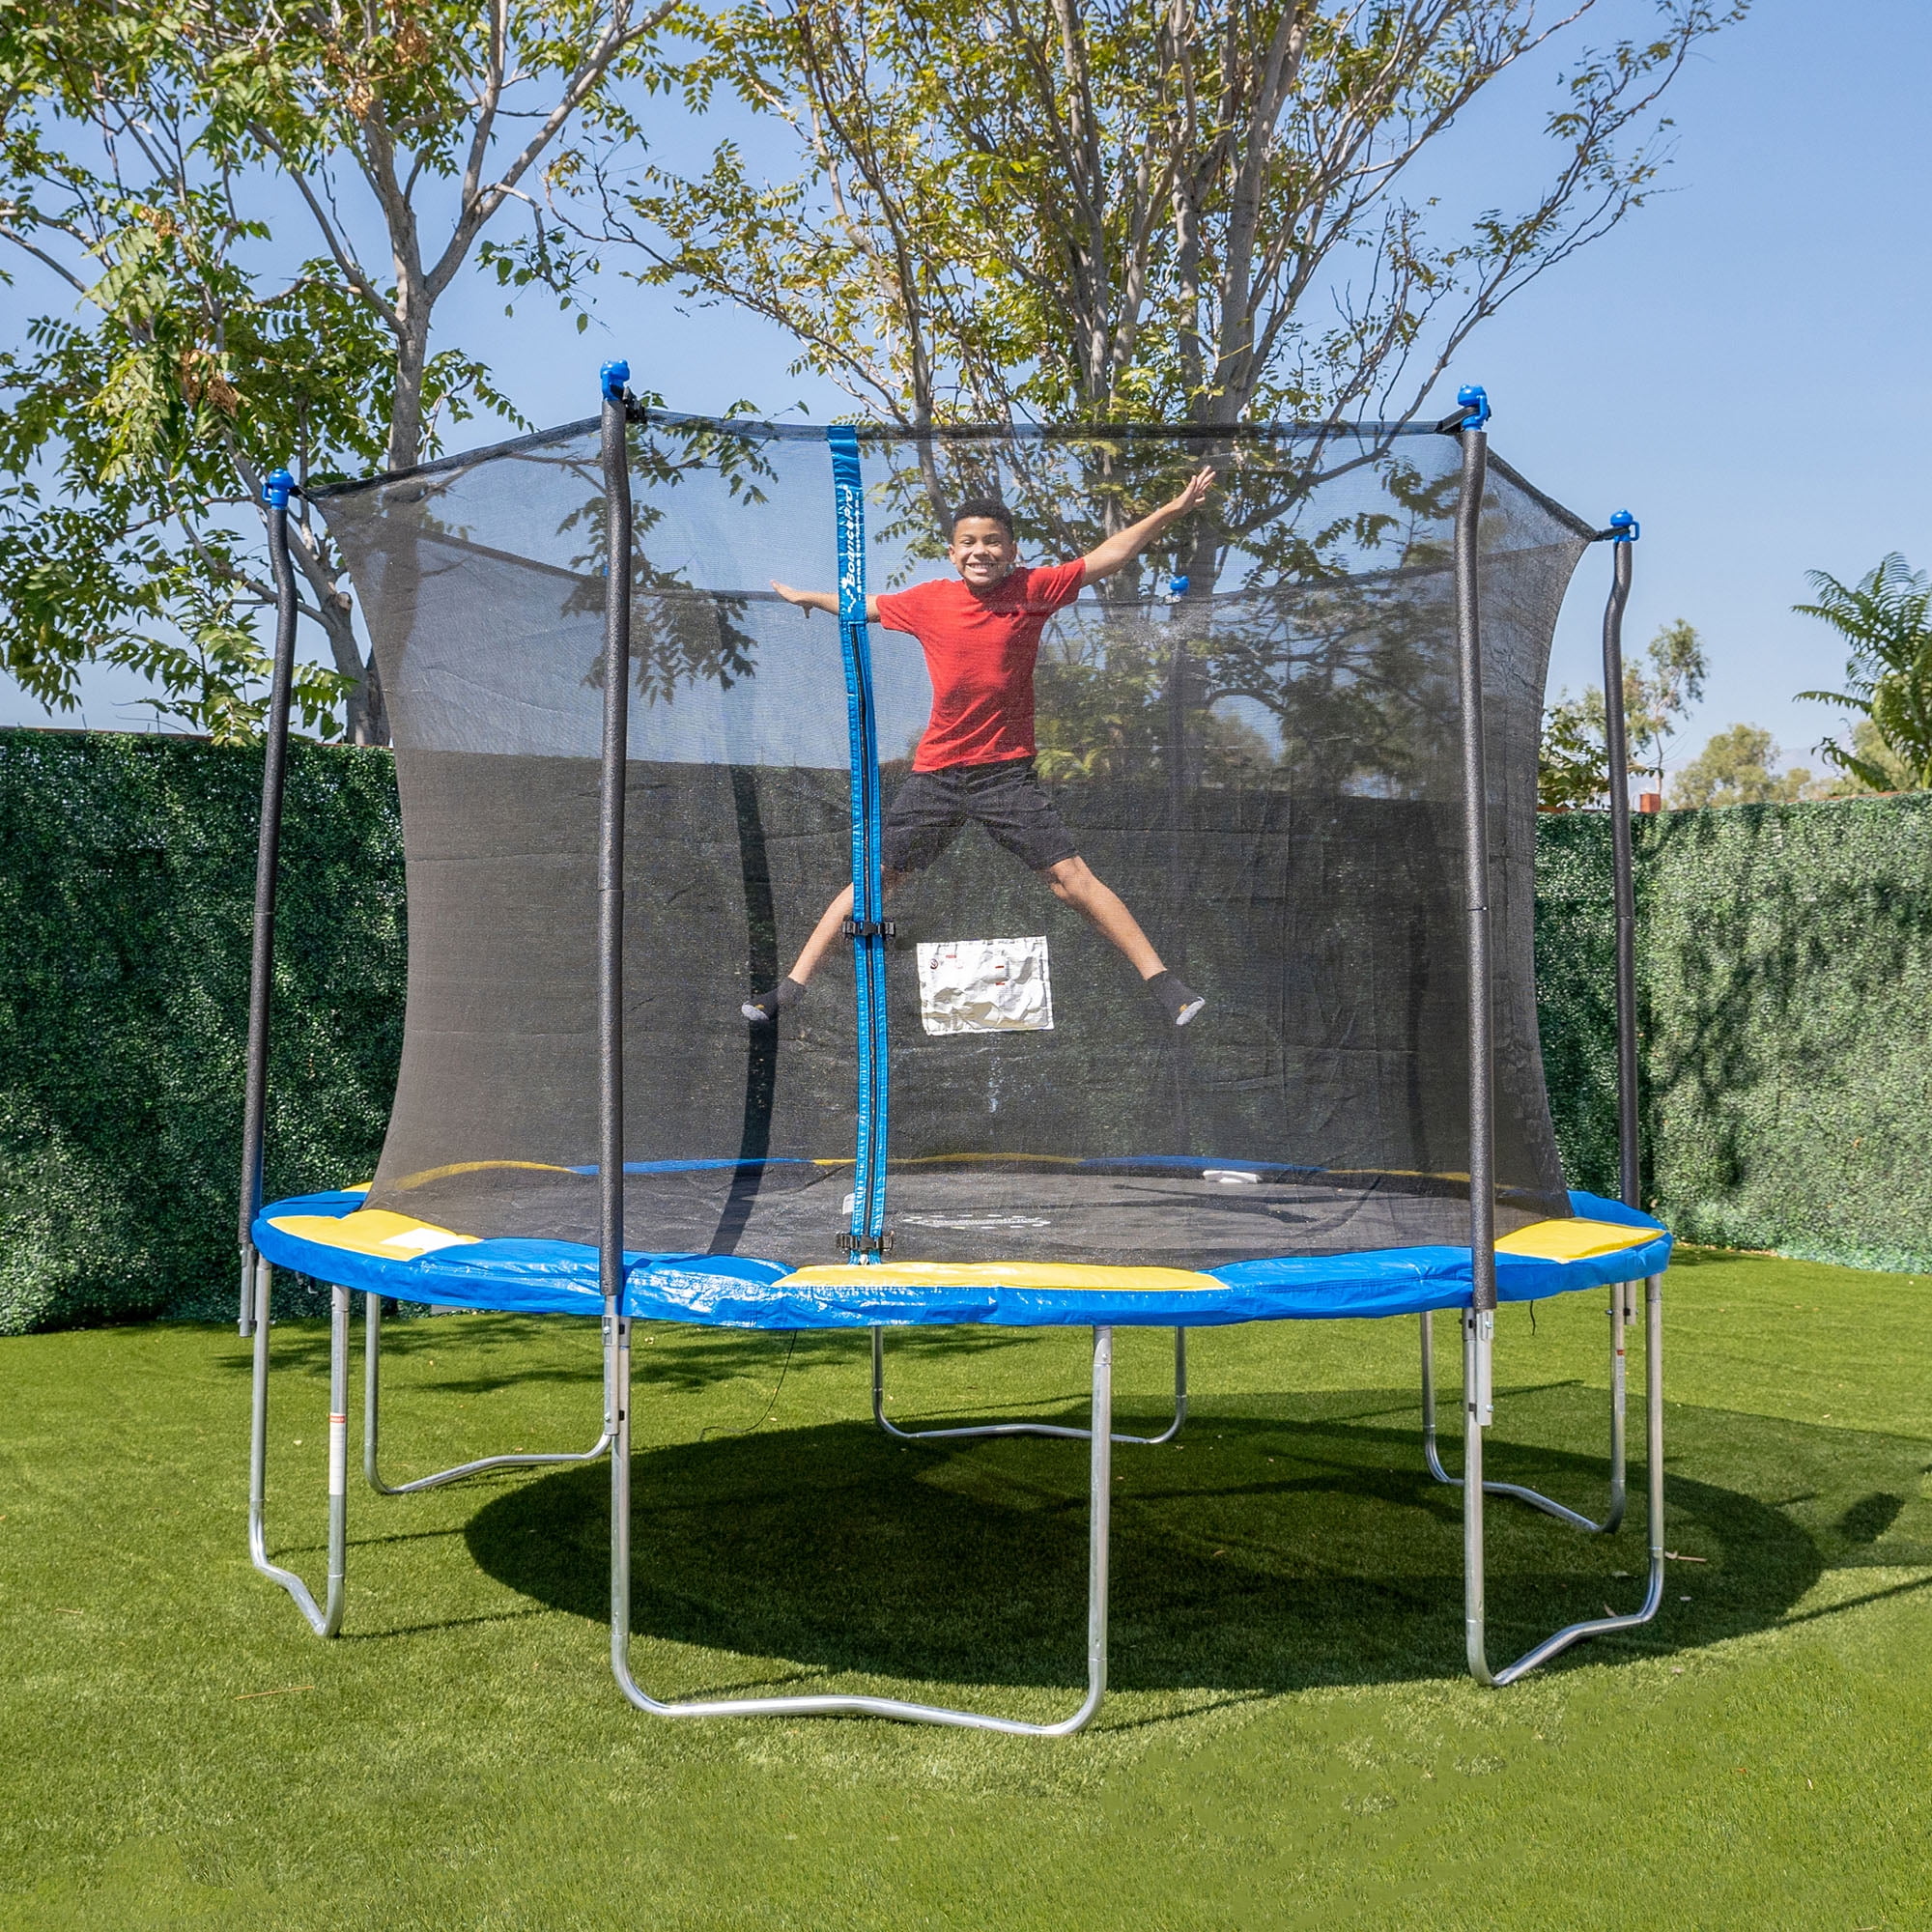 A kid jumping on the Bounce Pro 12 ft Trampoline.